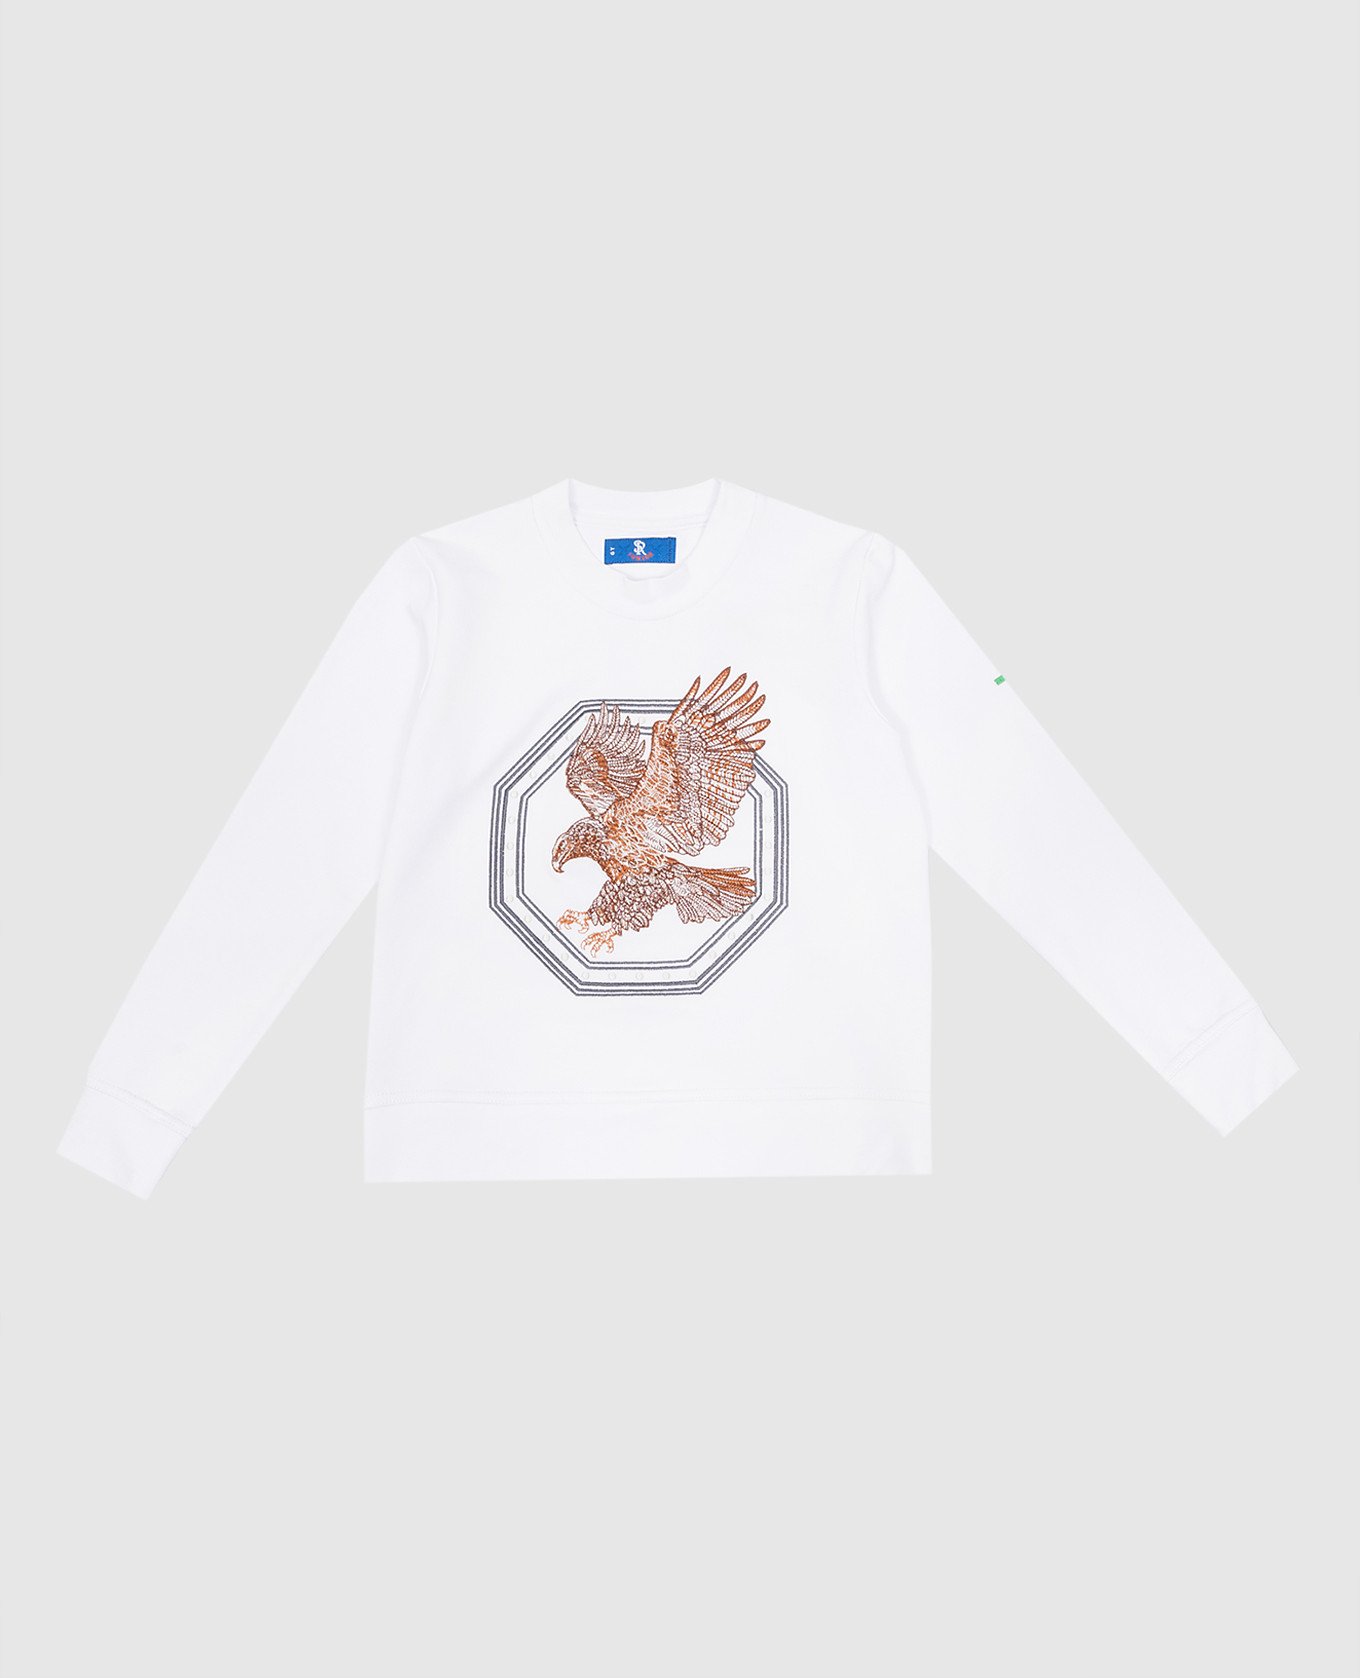 Children's white sweatshirt with embroidered logo emblem in the form of an eagle